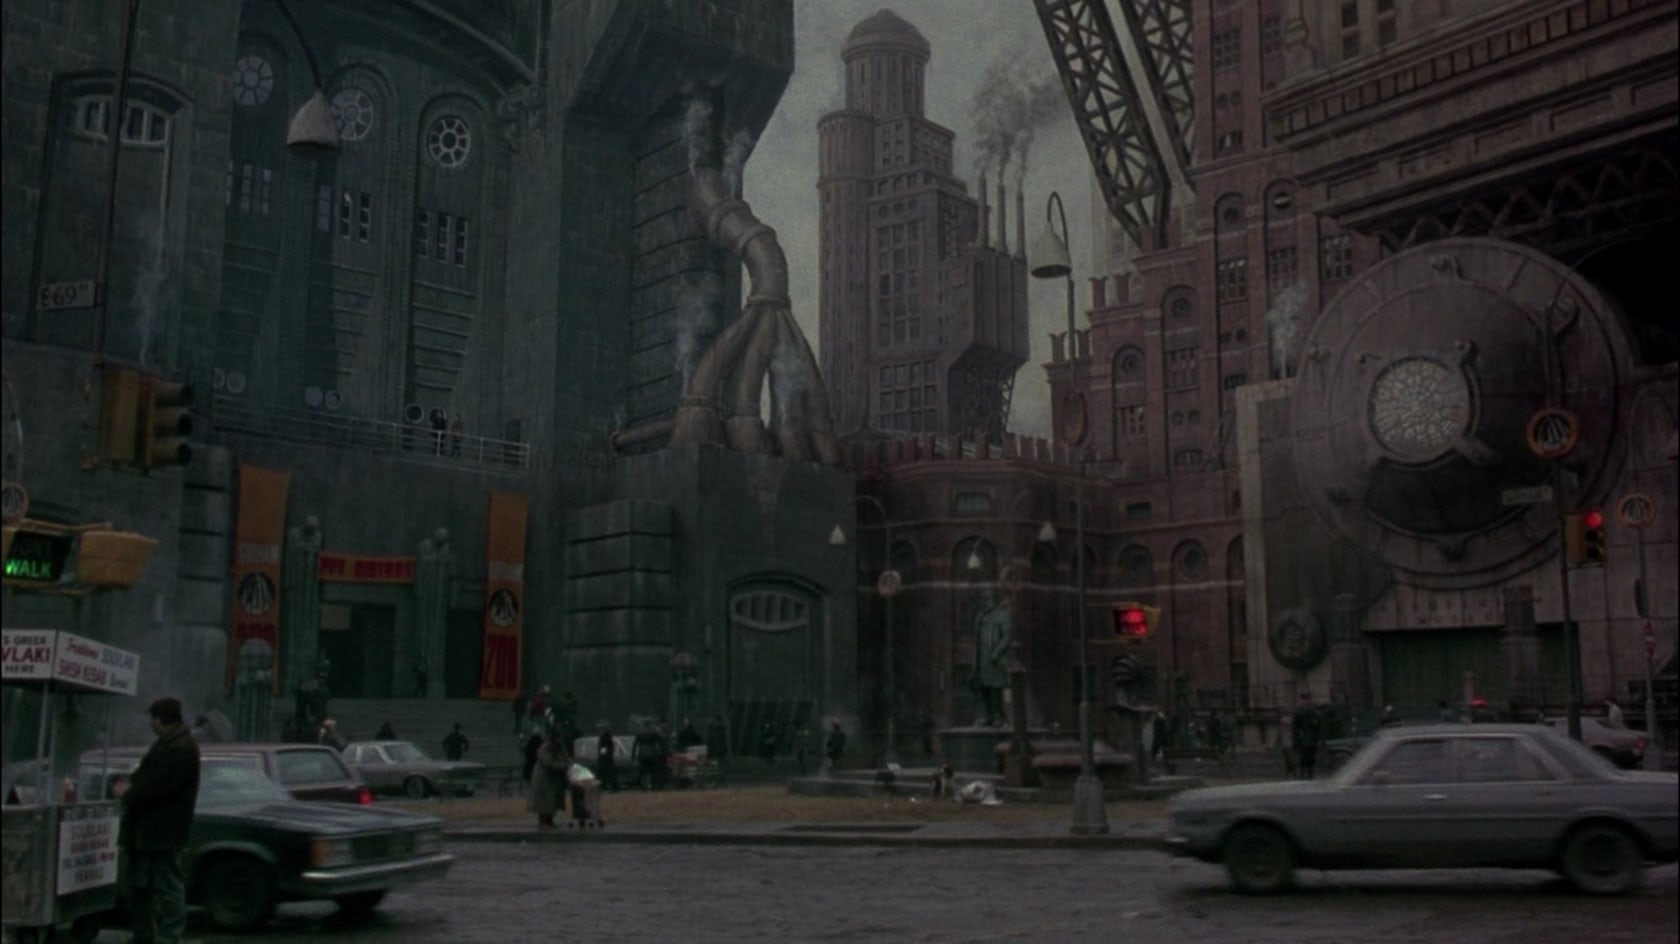 Urban Dystopia: The Architecture of Gotham City - Architizer Journal